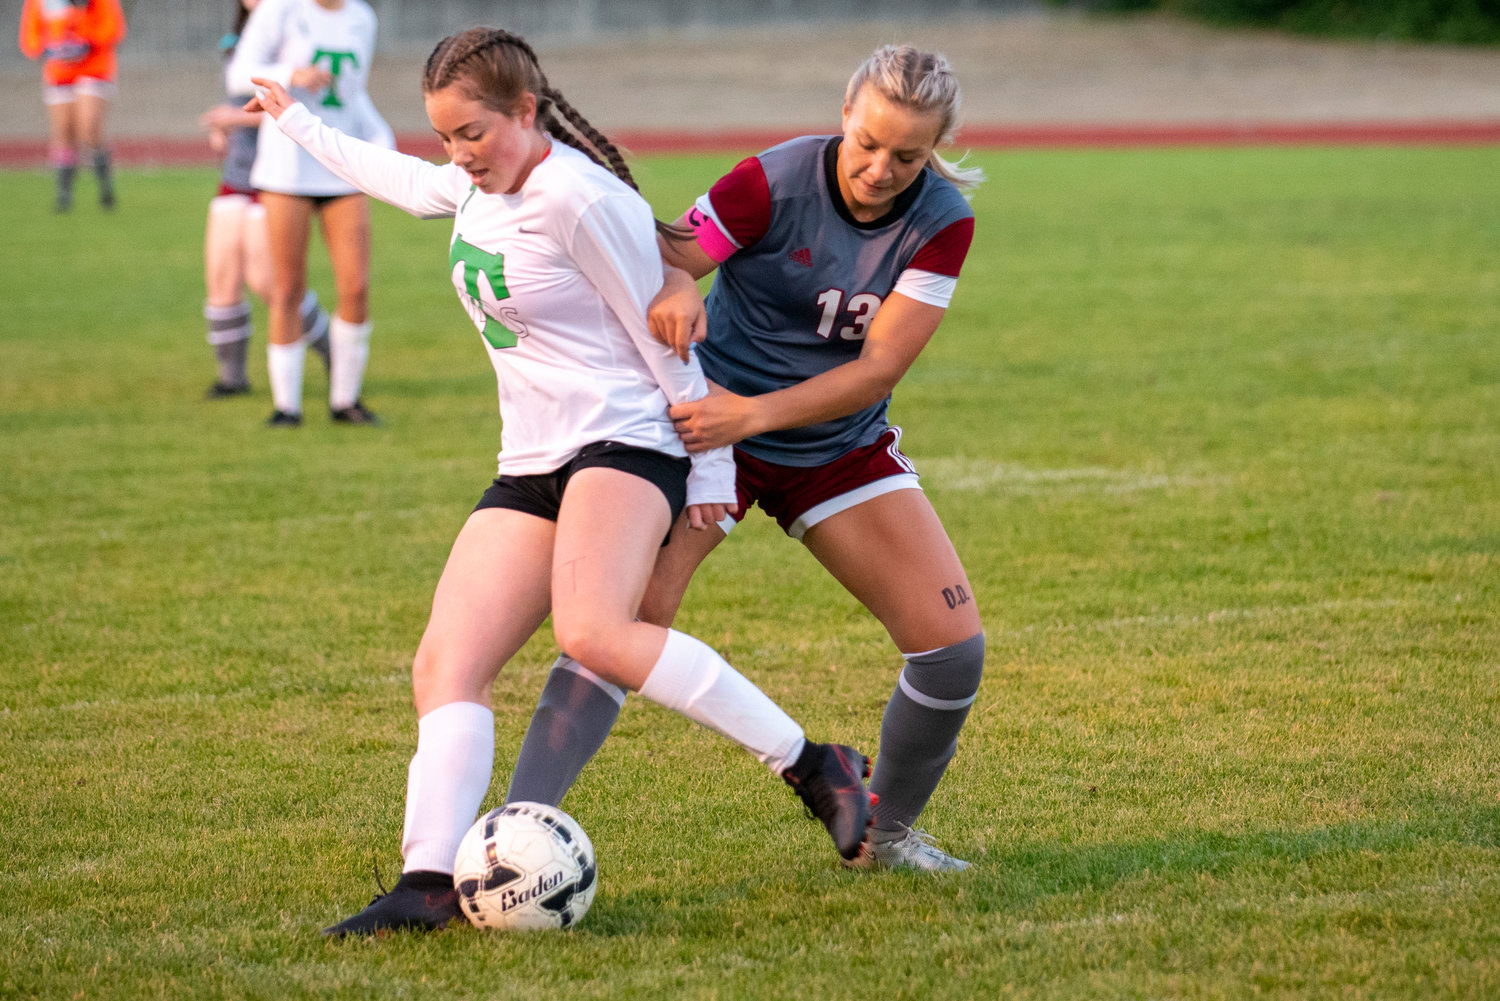 FILE PHOTO -- W.F. West's Cameron Sheets (13) battles for the ball against Tumwater's Olivia Kee earlier this year.